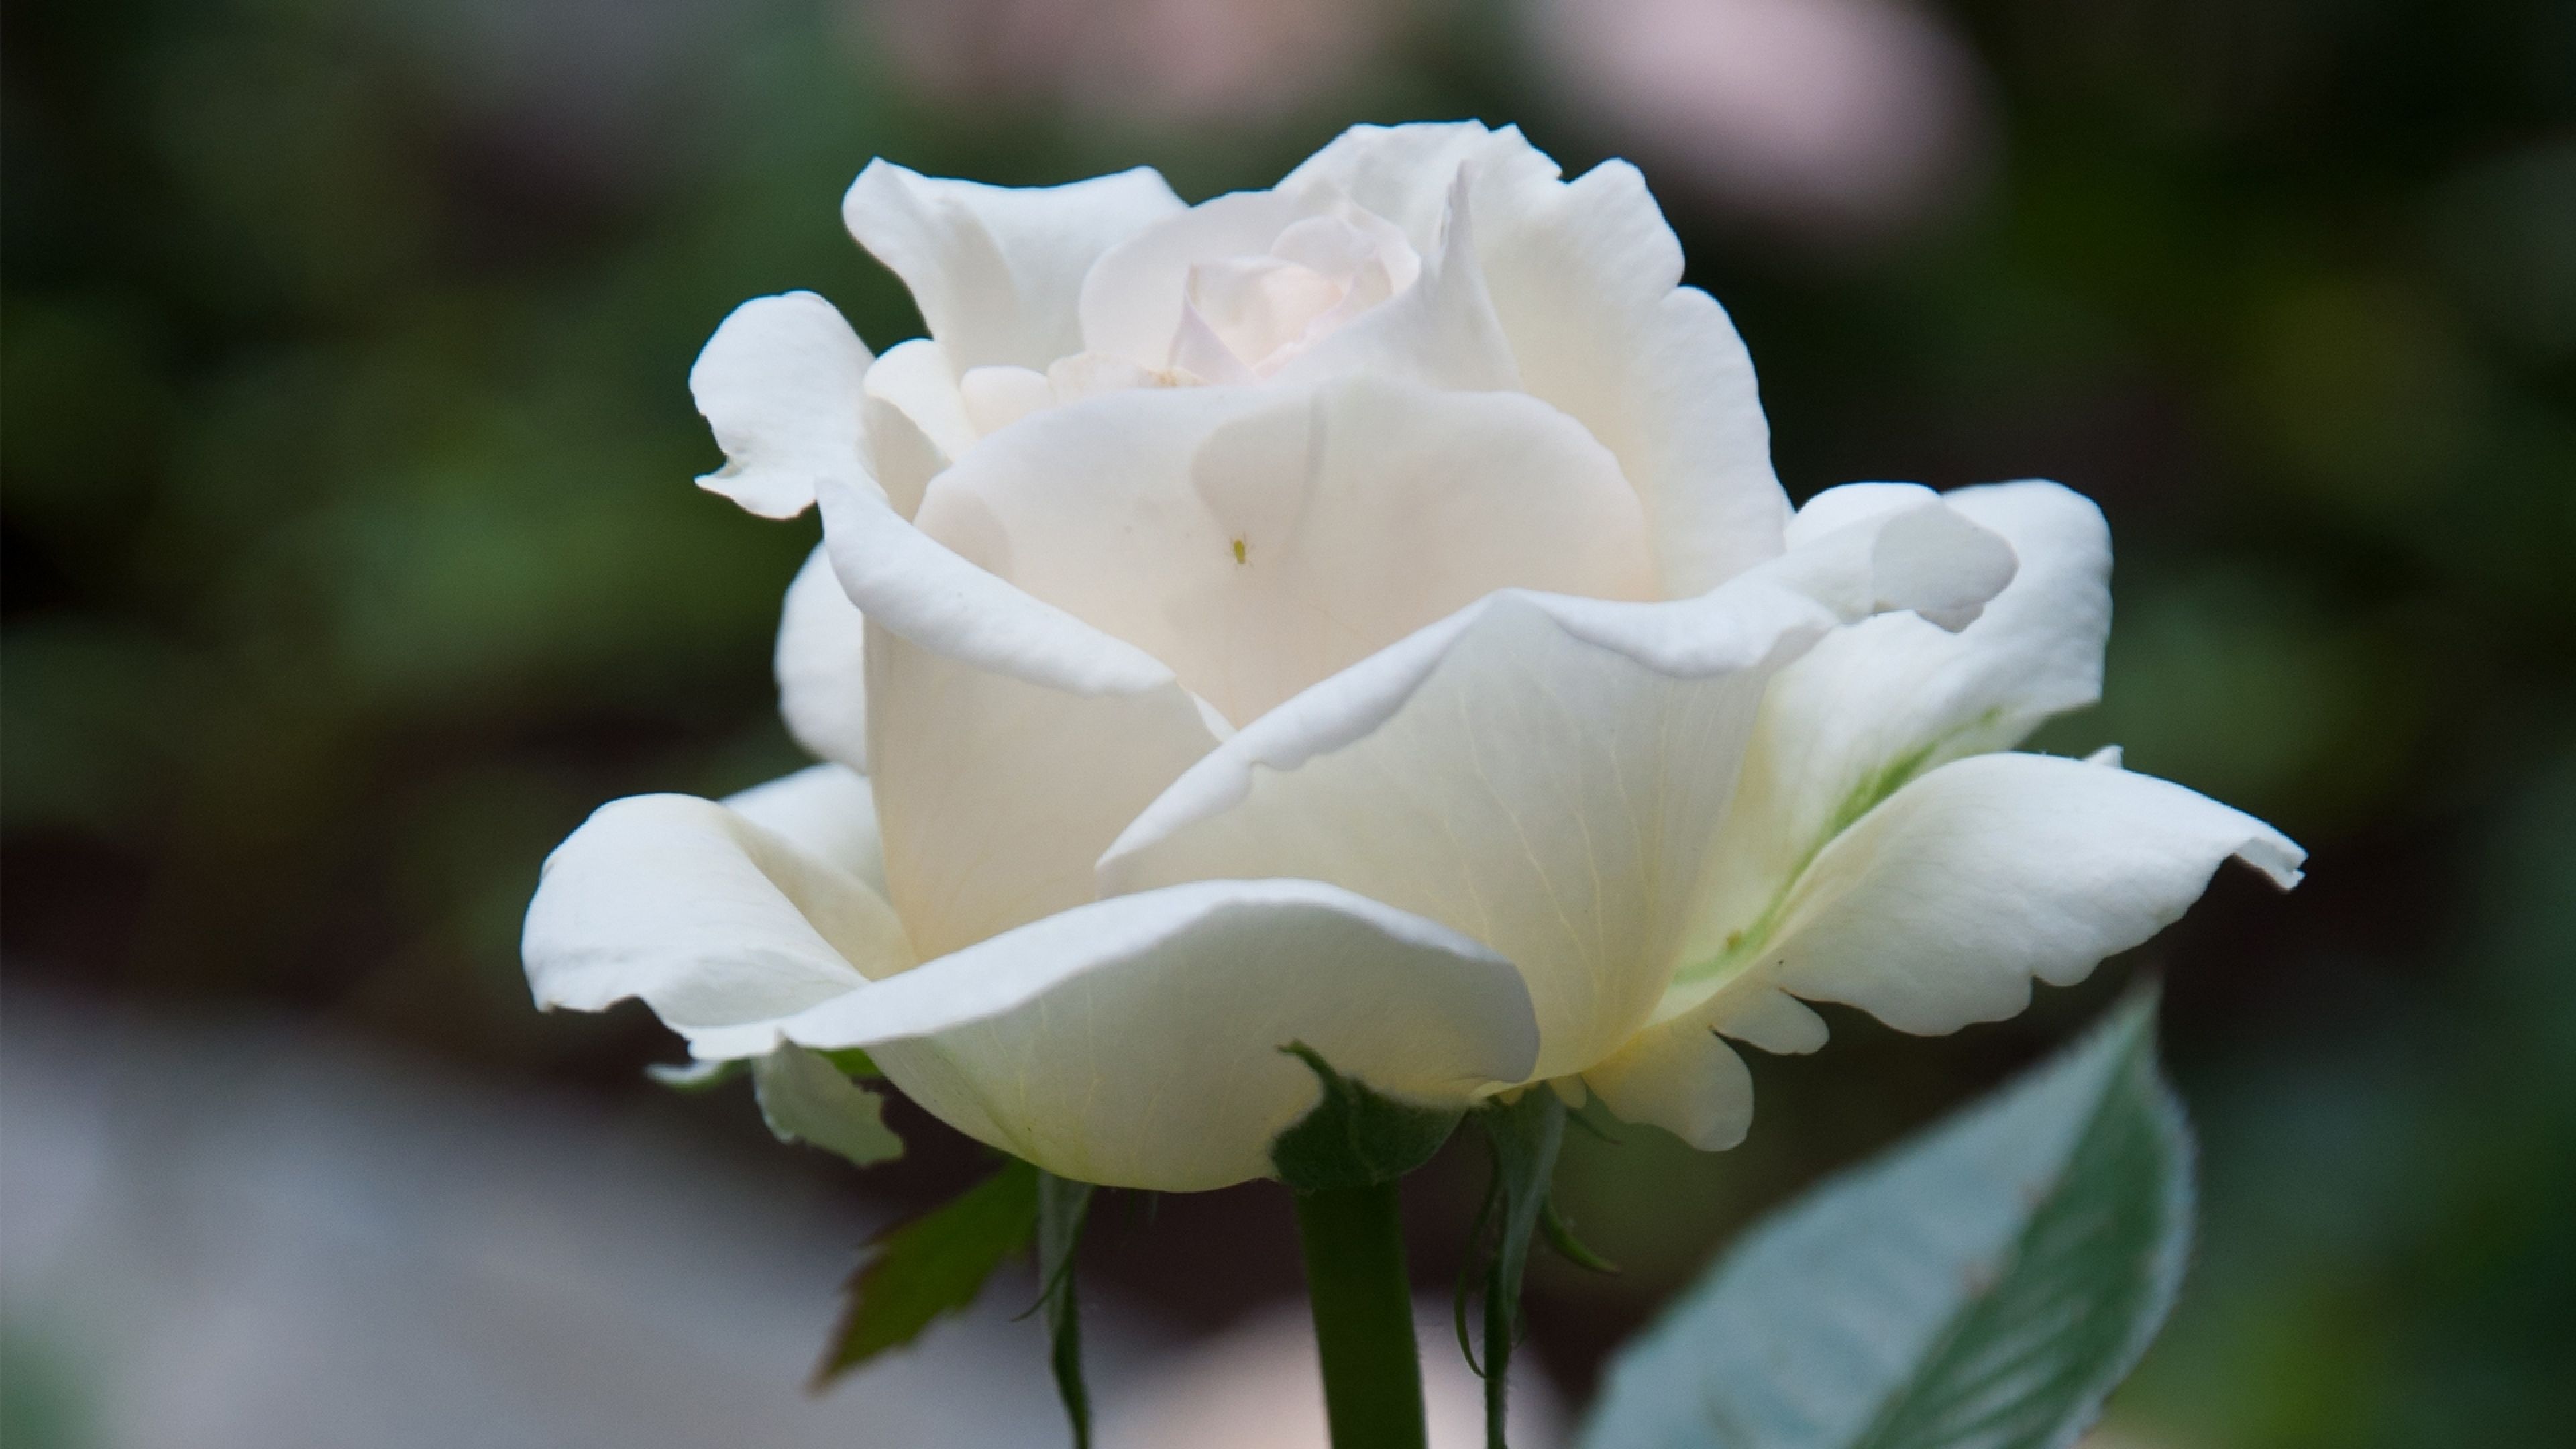 🔥 Download Beautiful White Rose 4k Flower Wallpaper And HD Image